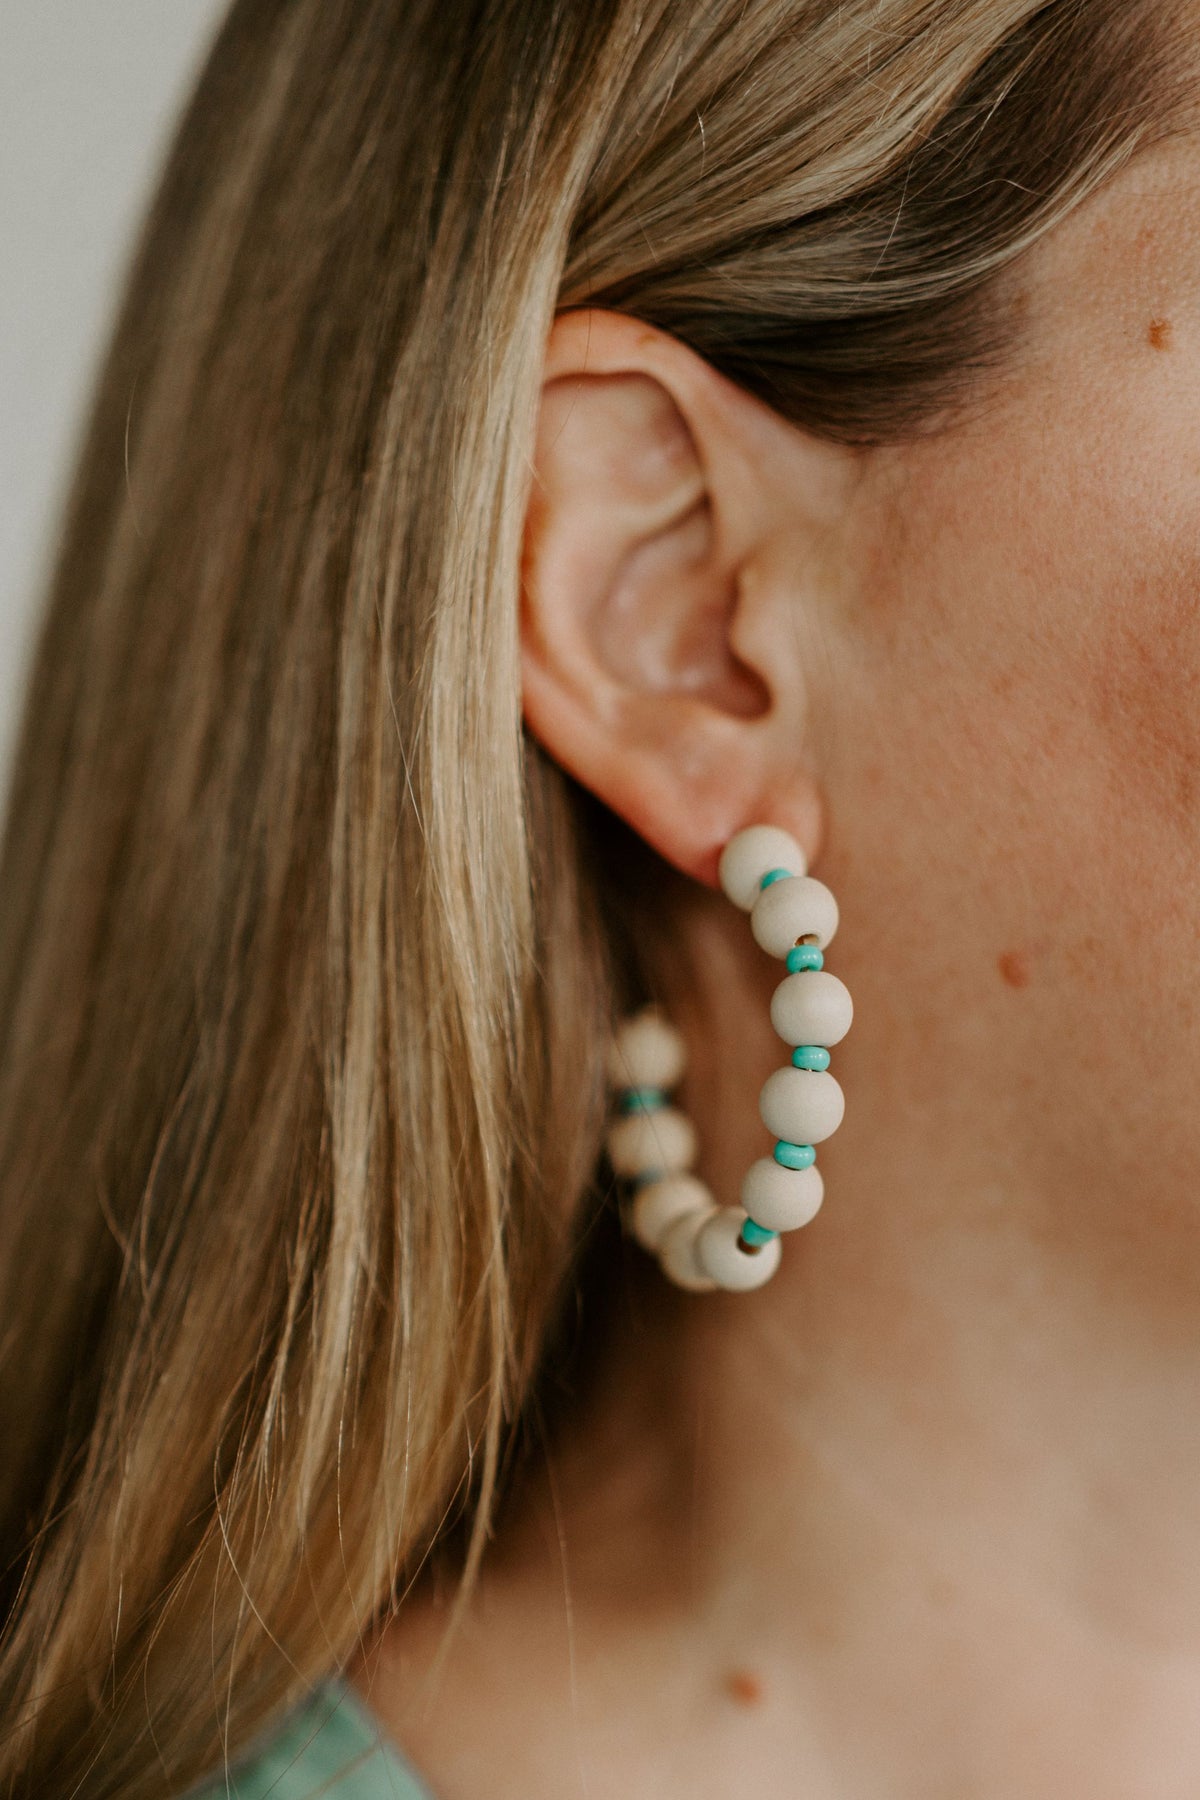 Teal and Neutral Earrings